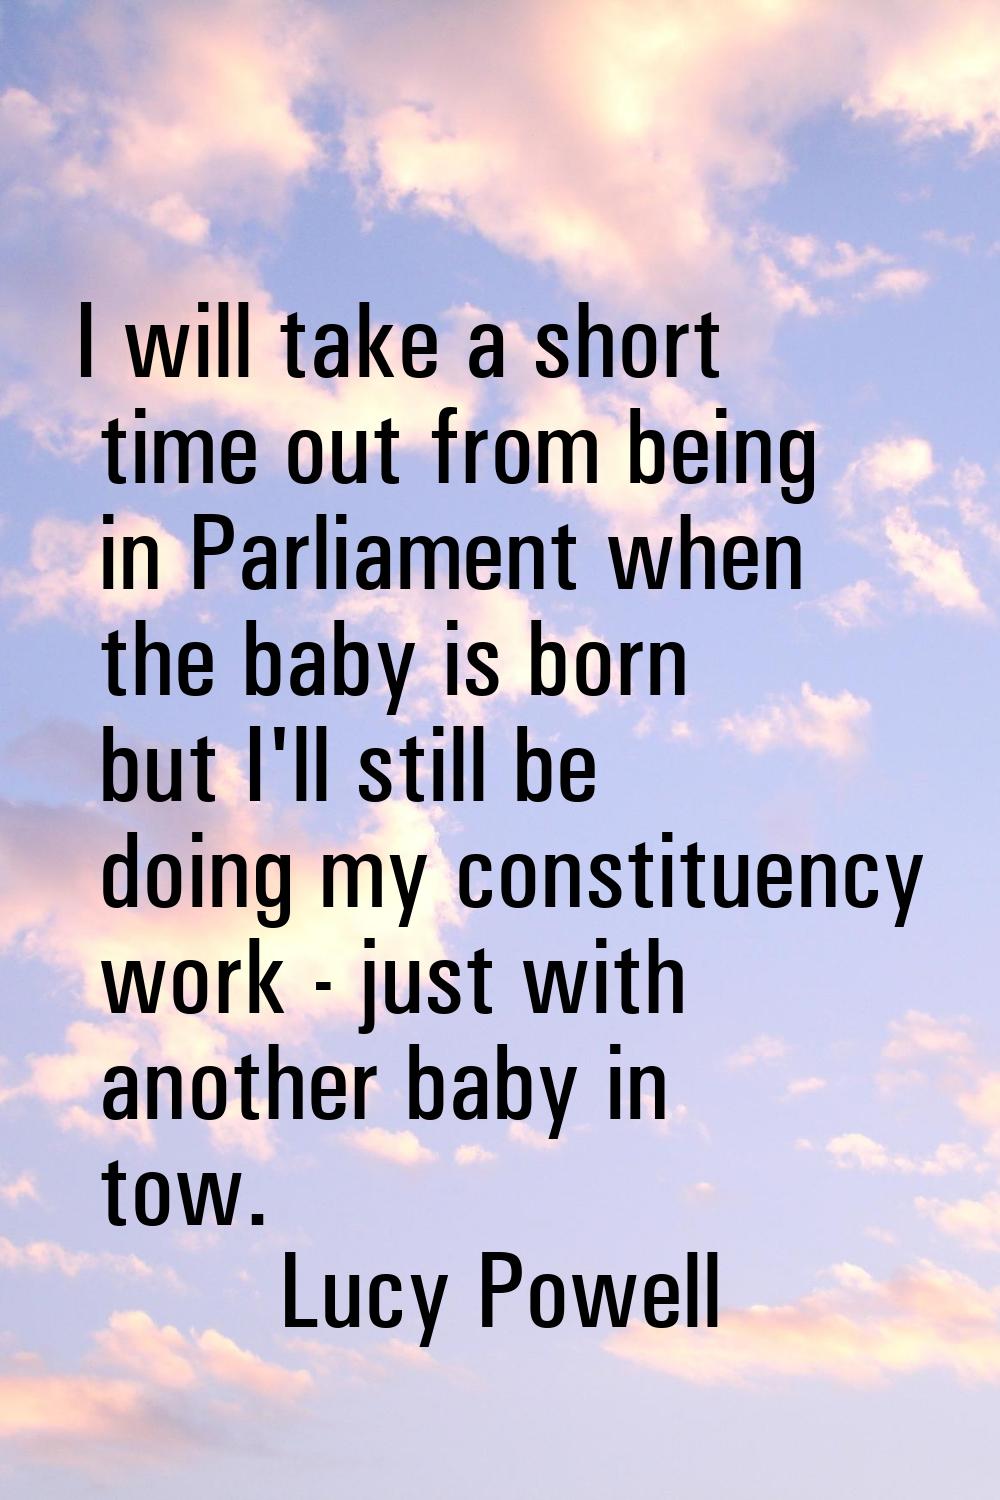 I will take a short time out from being in Parliament when the baby is born but I'll still be doing